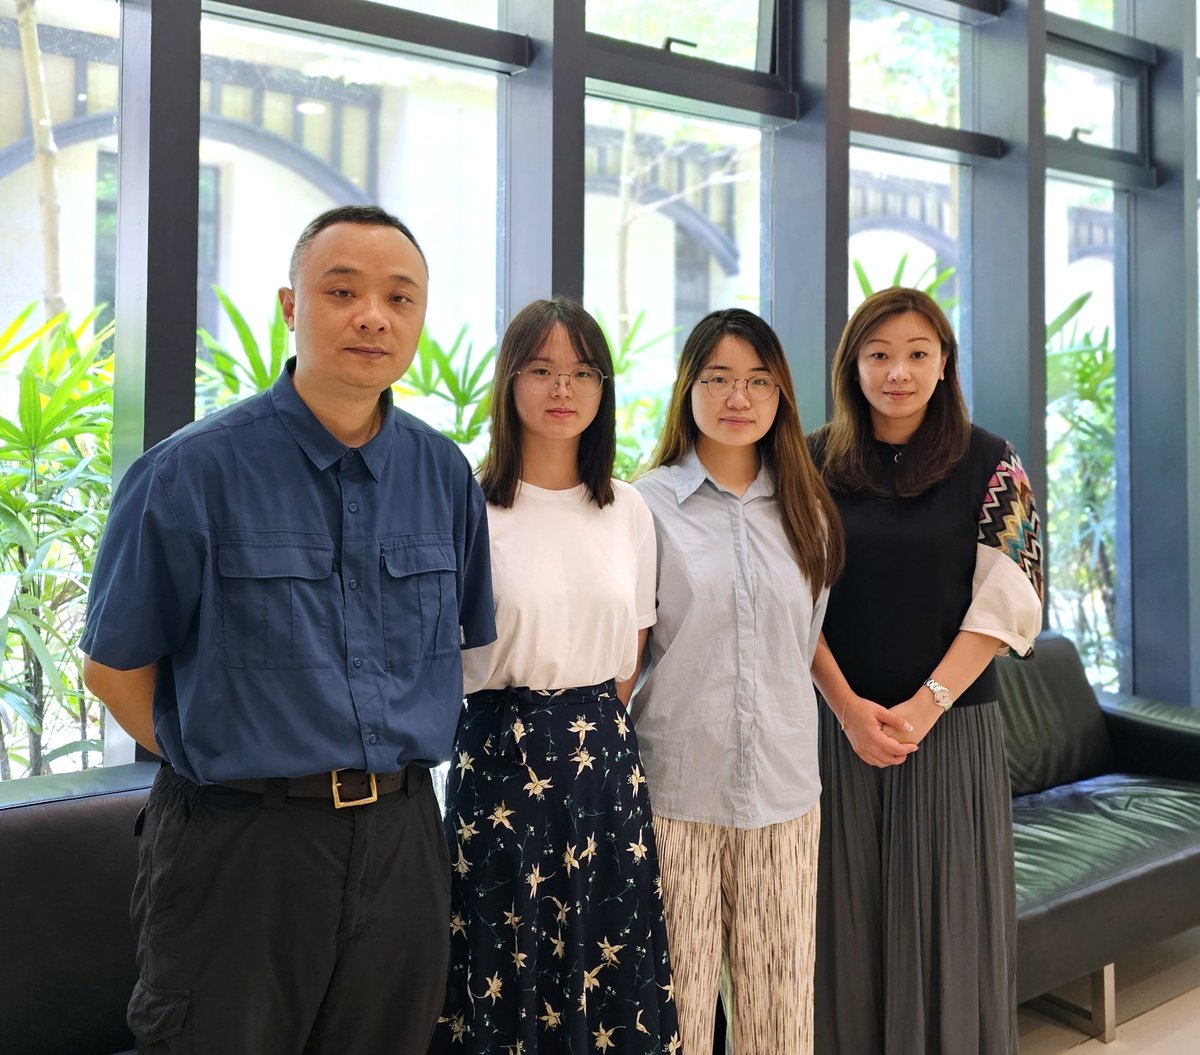 A research team at #UM has analysed the benchmarking indicator systems and tools used by various international regulatory agencies in pursuit of a guiding reference for drug regulatory capacity building. go.um.edu.mo/fcinhrb2

#universityofmacau #UMResearch